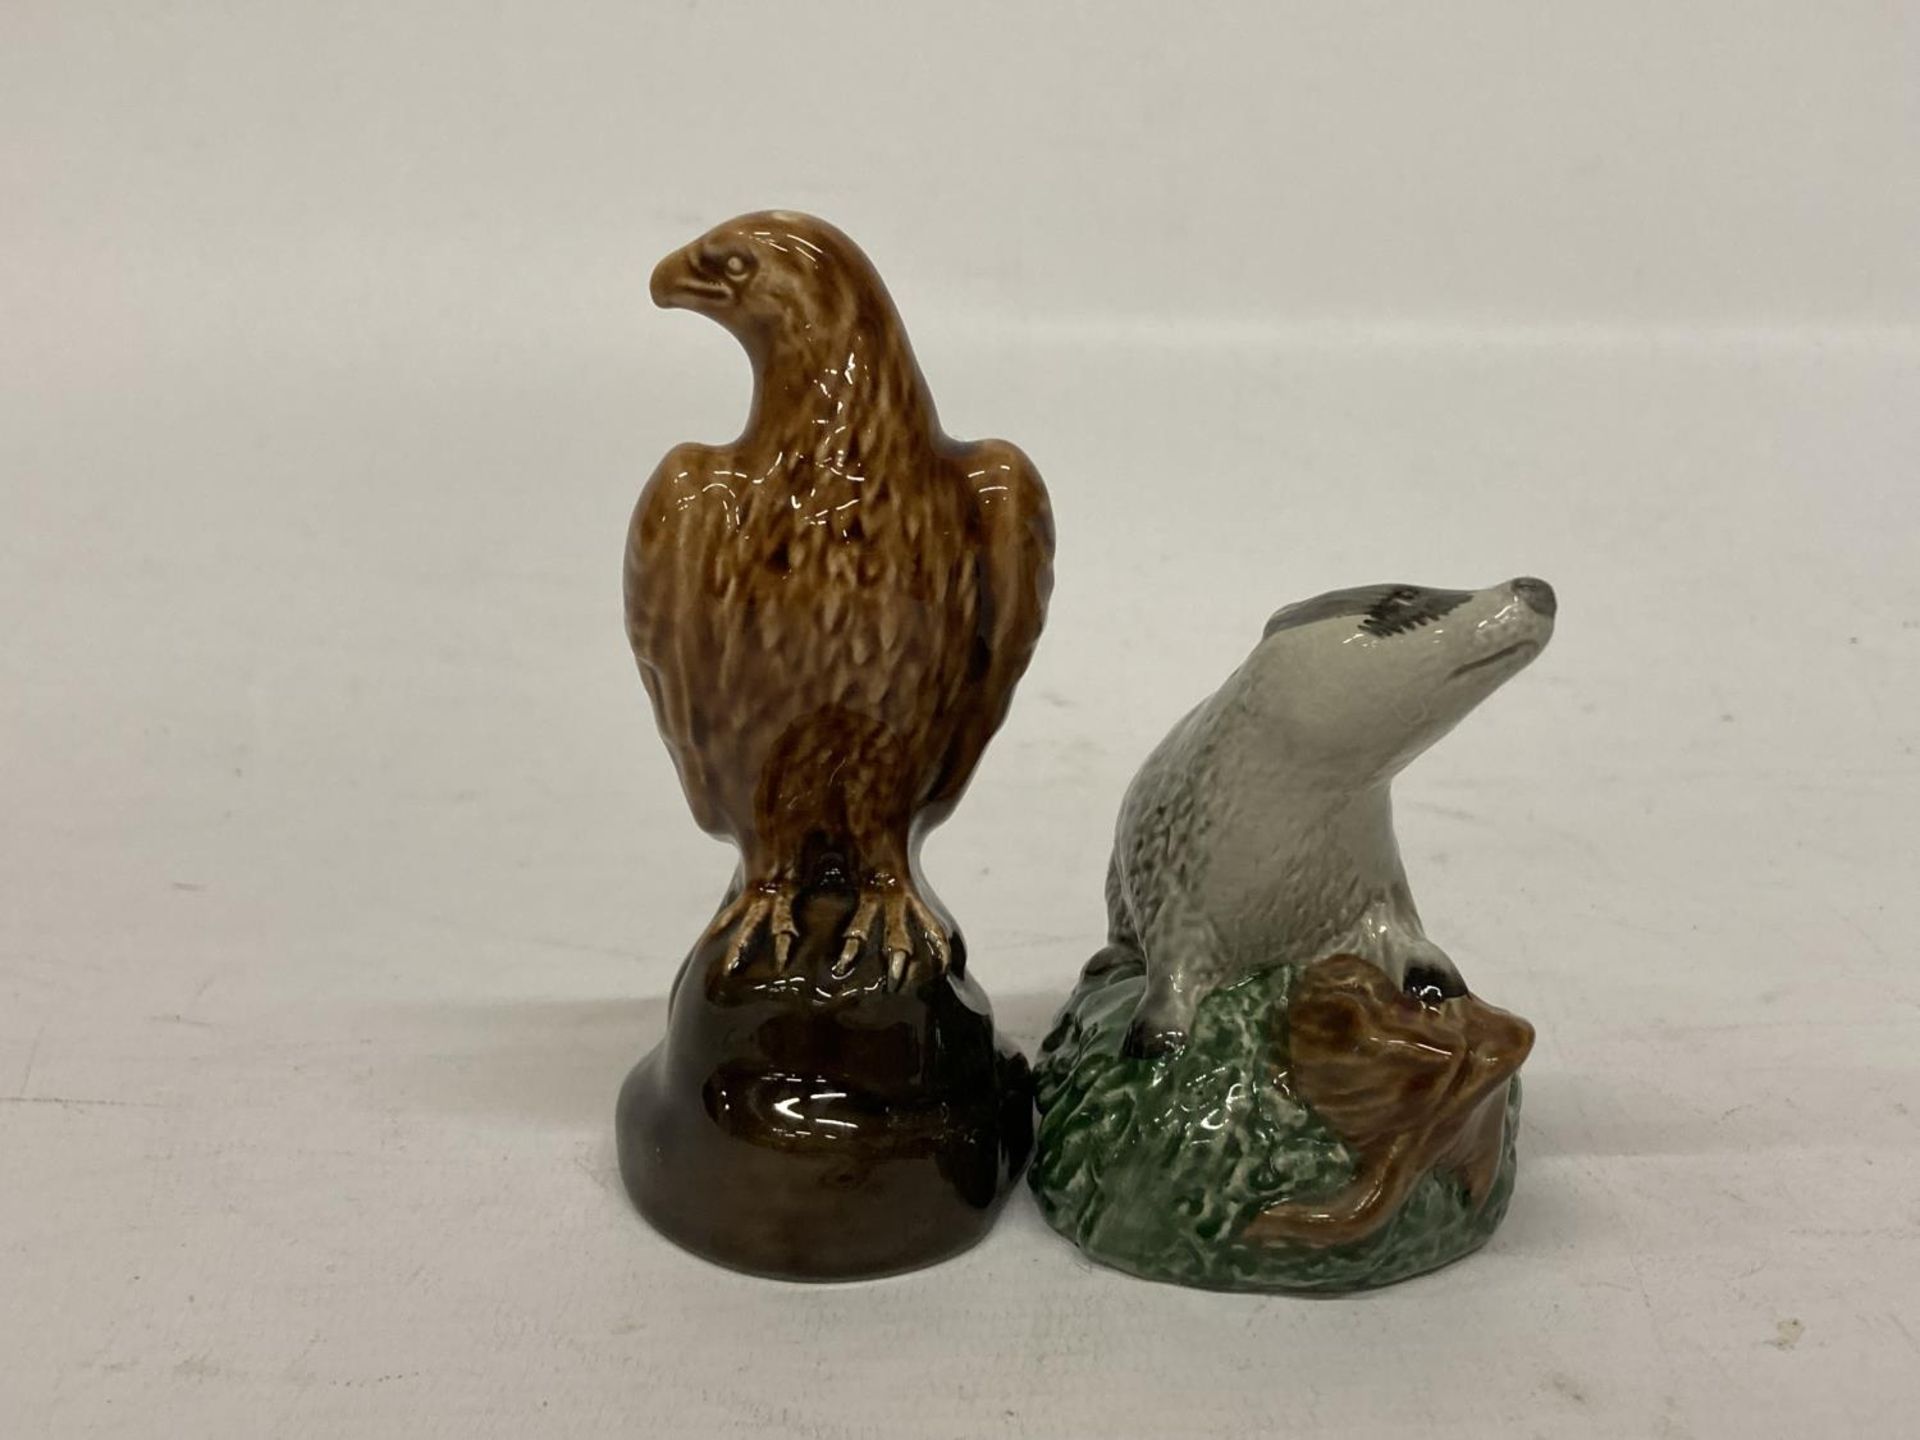 A BESWICK BENEAGLES MINIATURE SCOTCH WHISKEY EAGLE TOGETHER WITH A BADGER - Image 2 of 4